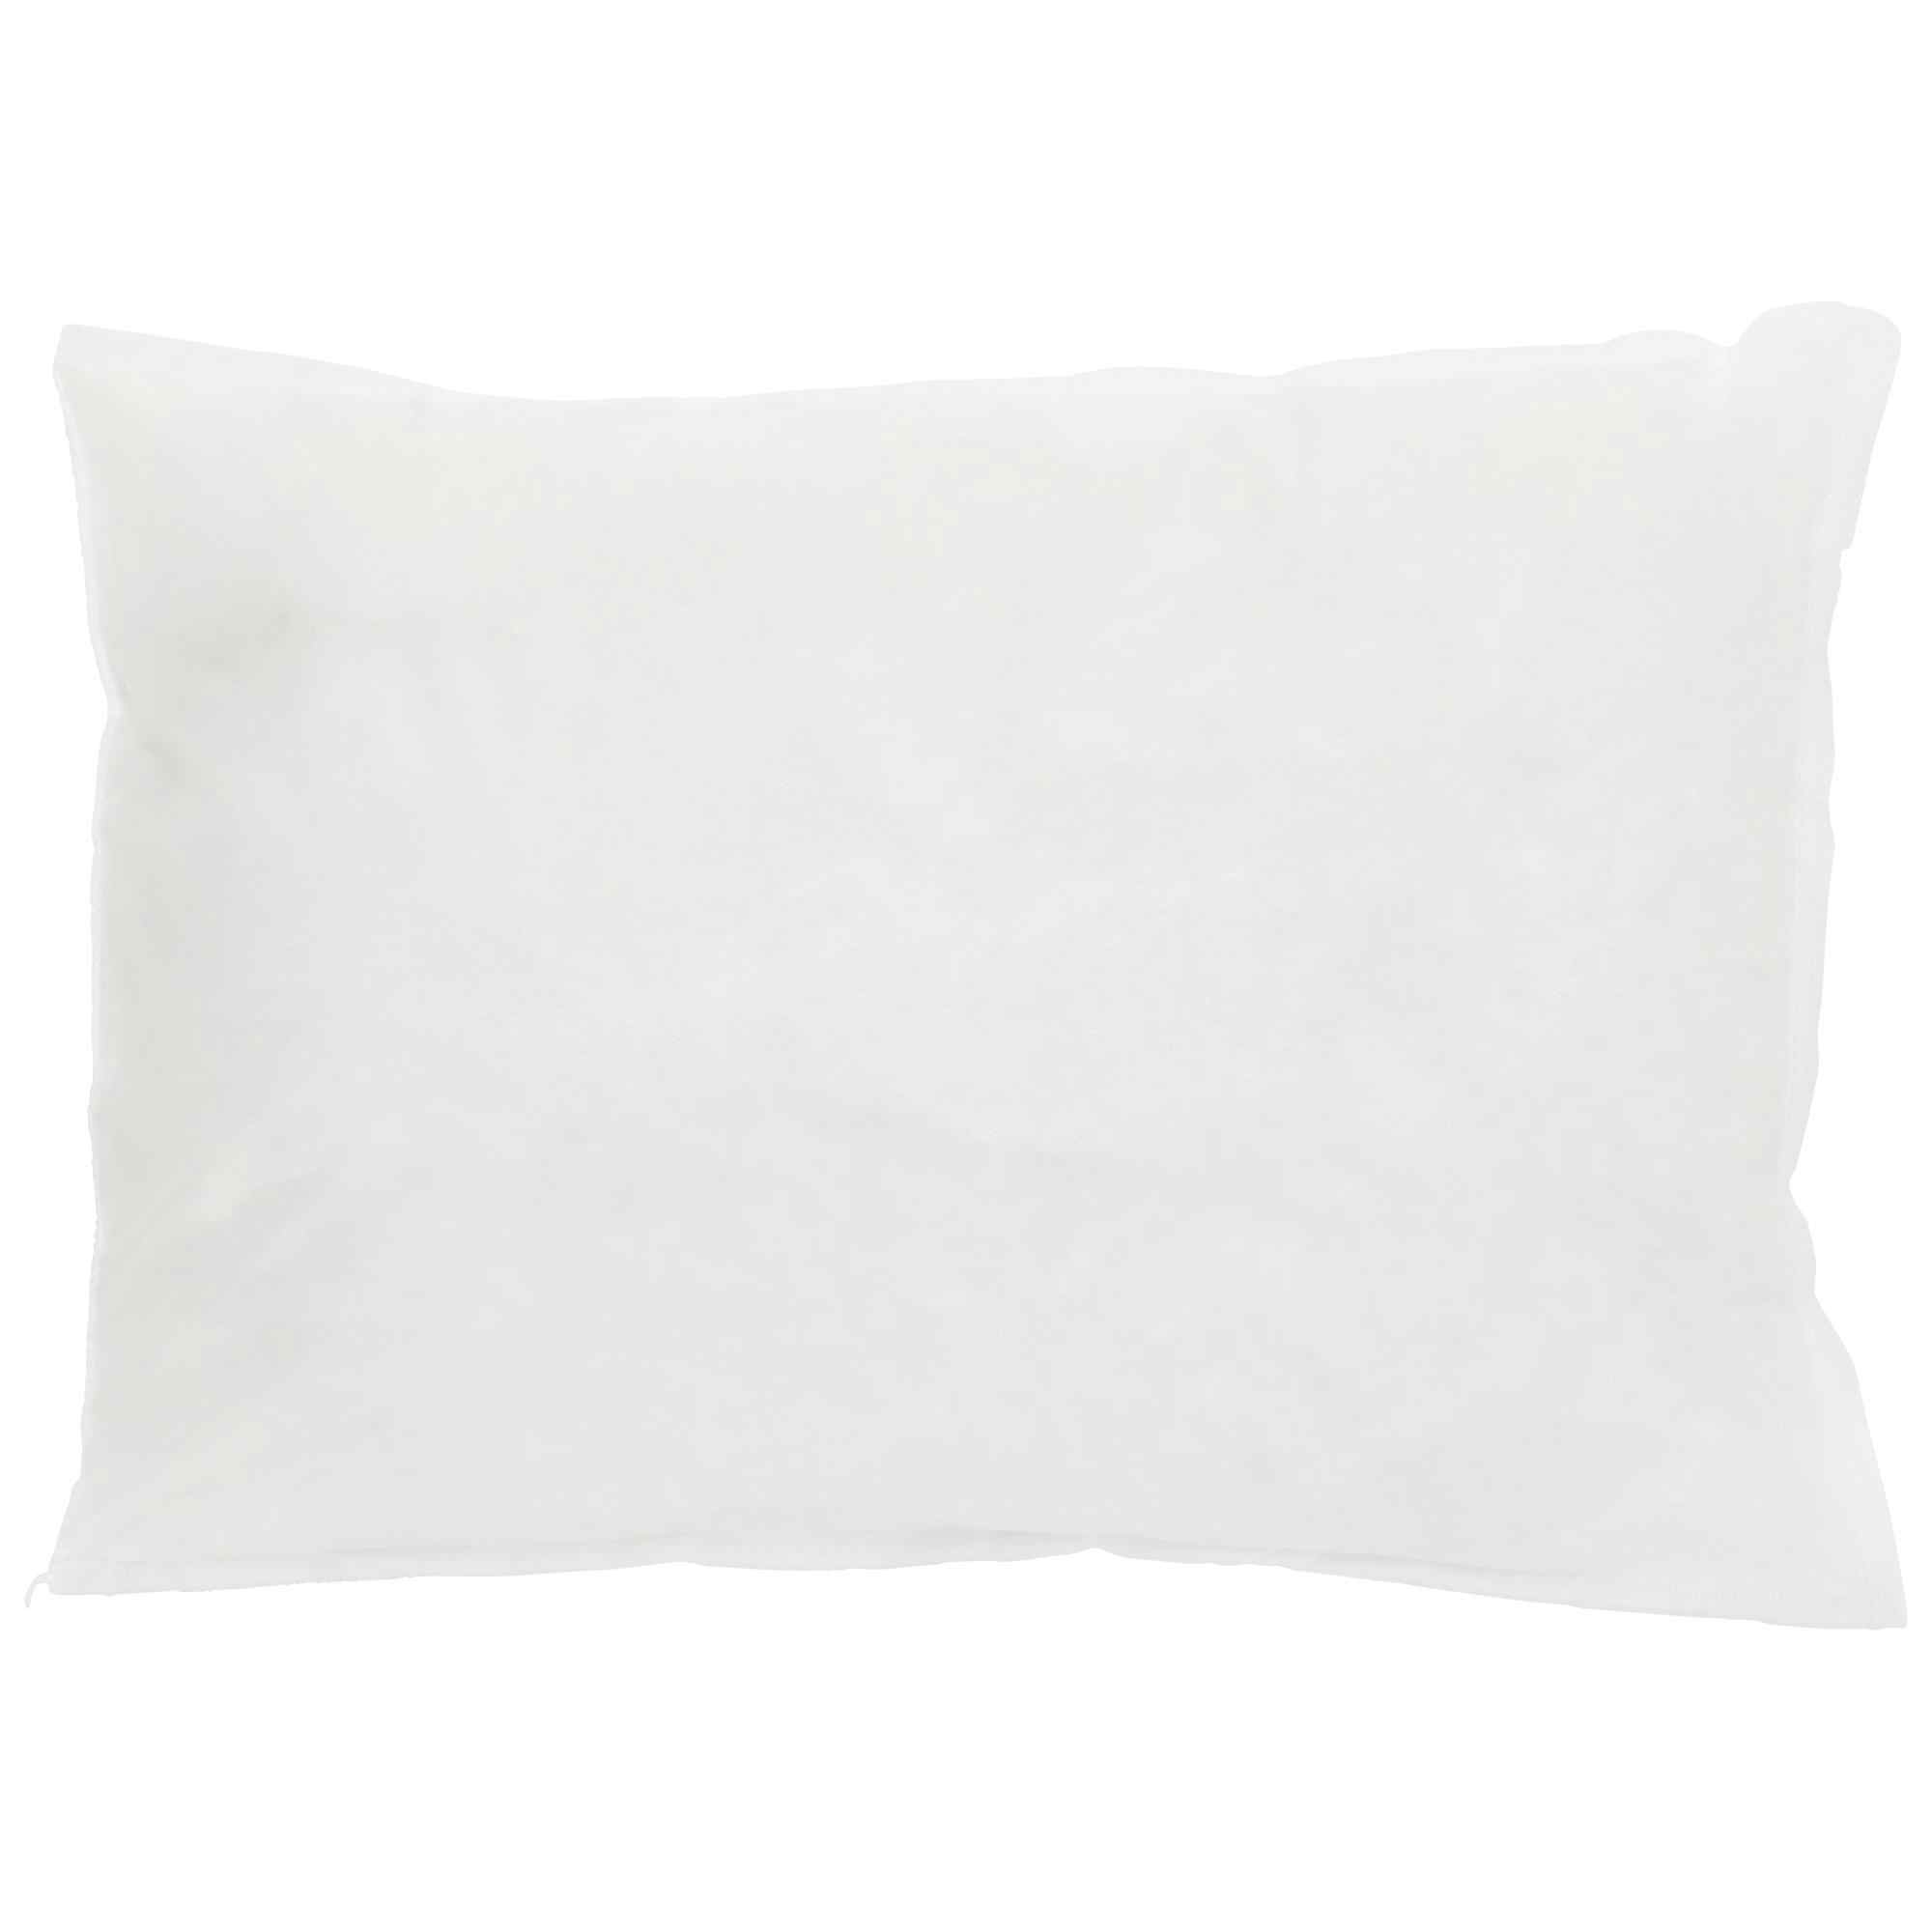 McKesson Disposable Bed Pillow, 41-1724-S, 1 Each